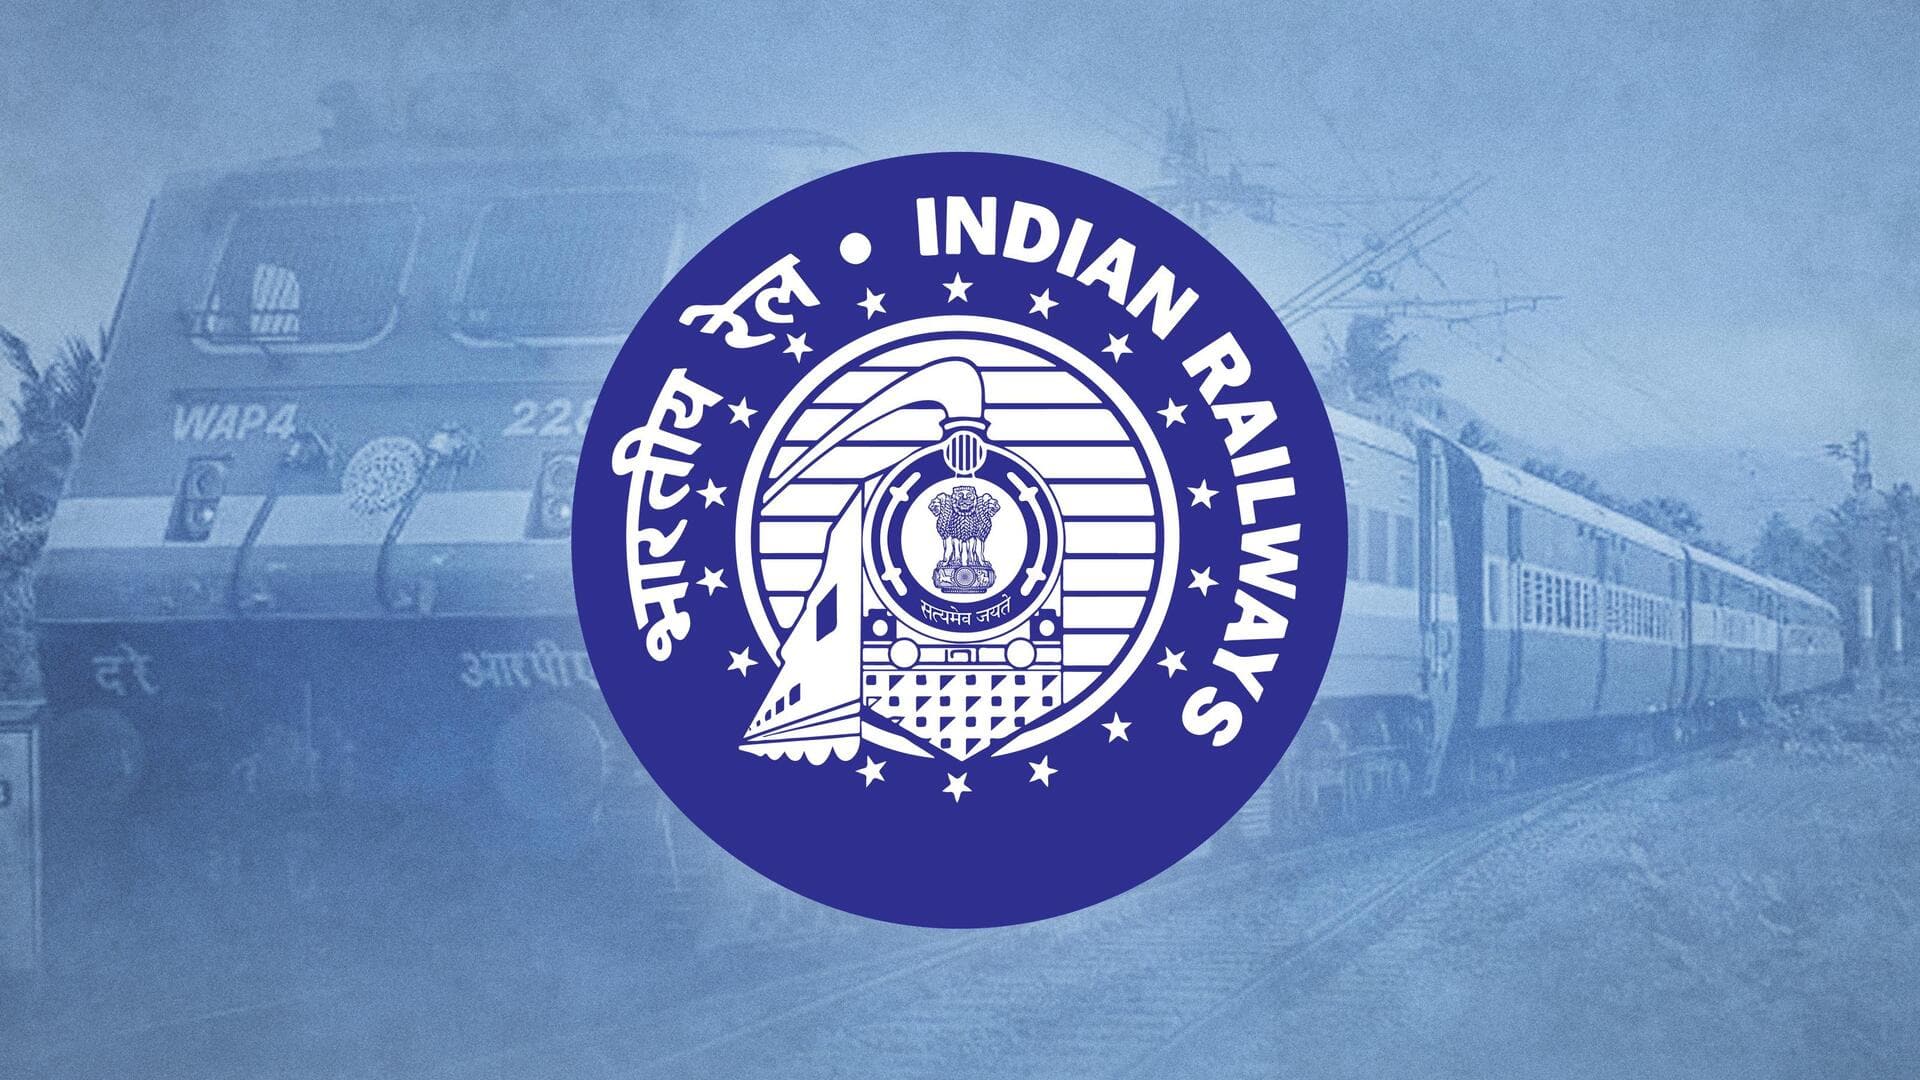 Indian Railways records highest-ever passenger numbers in April